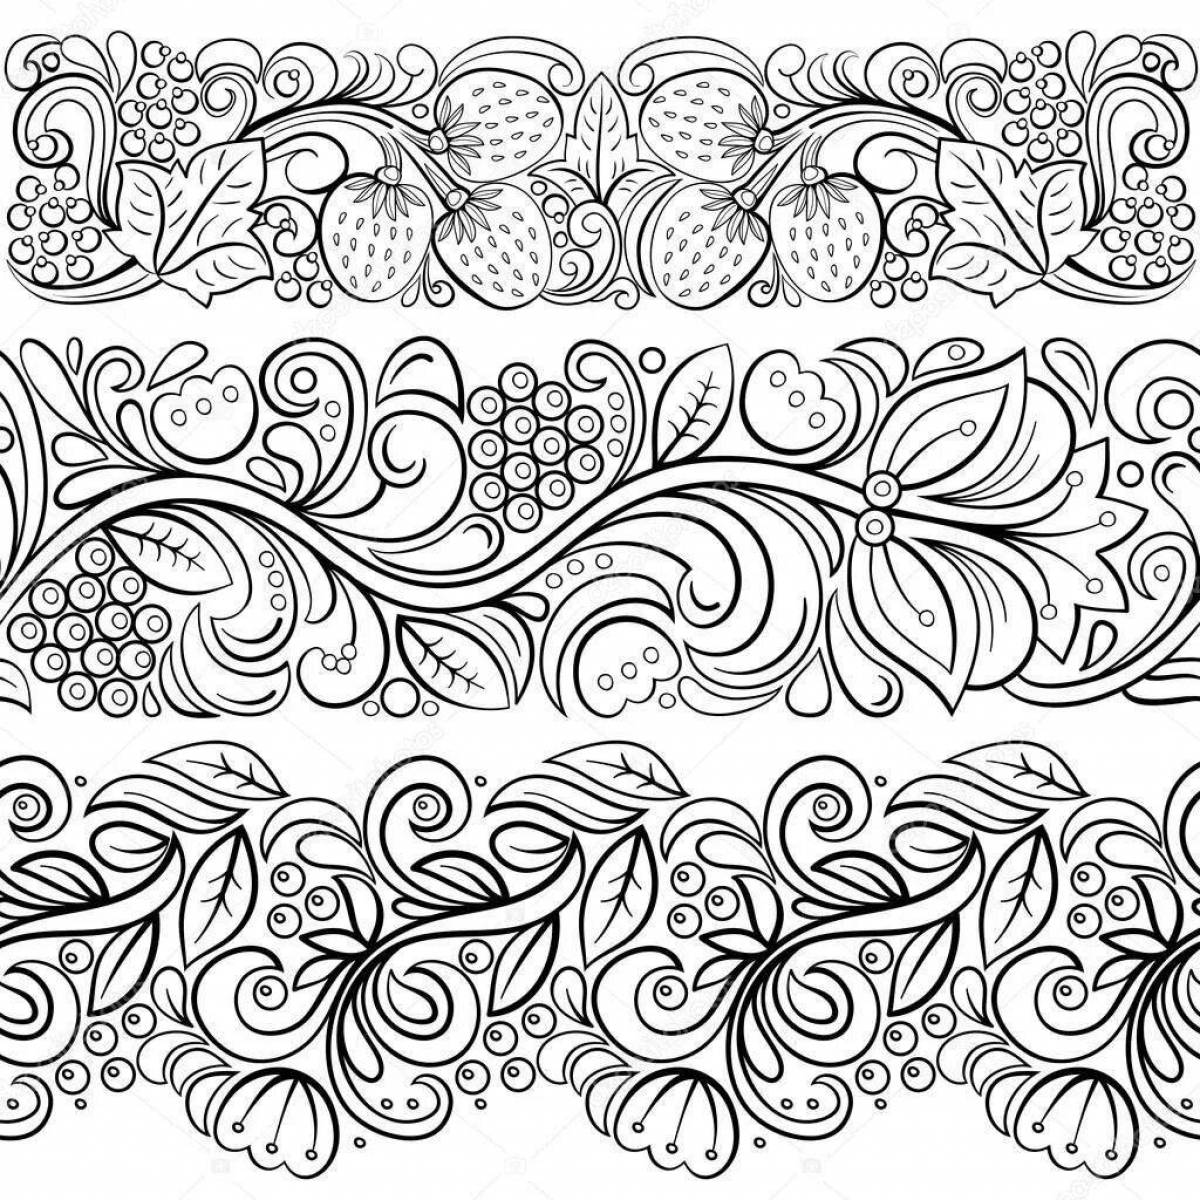 Coloring page gorgeous flower ornament